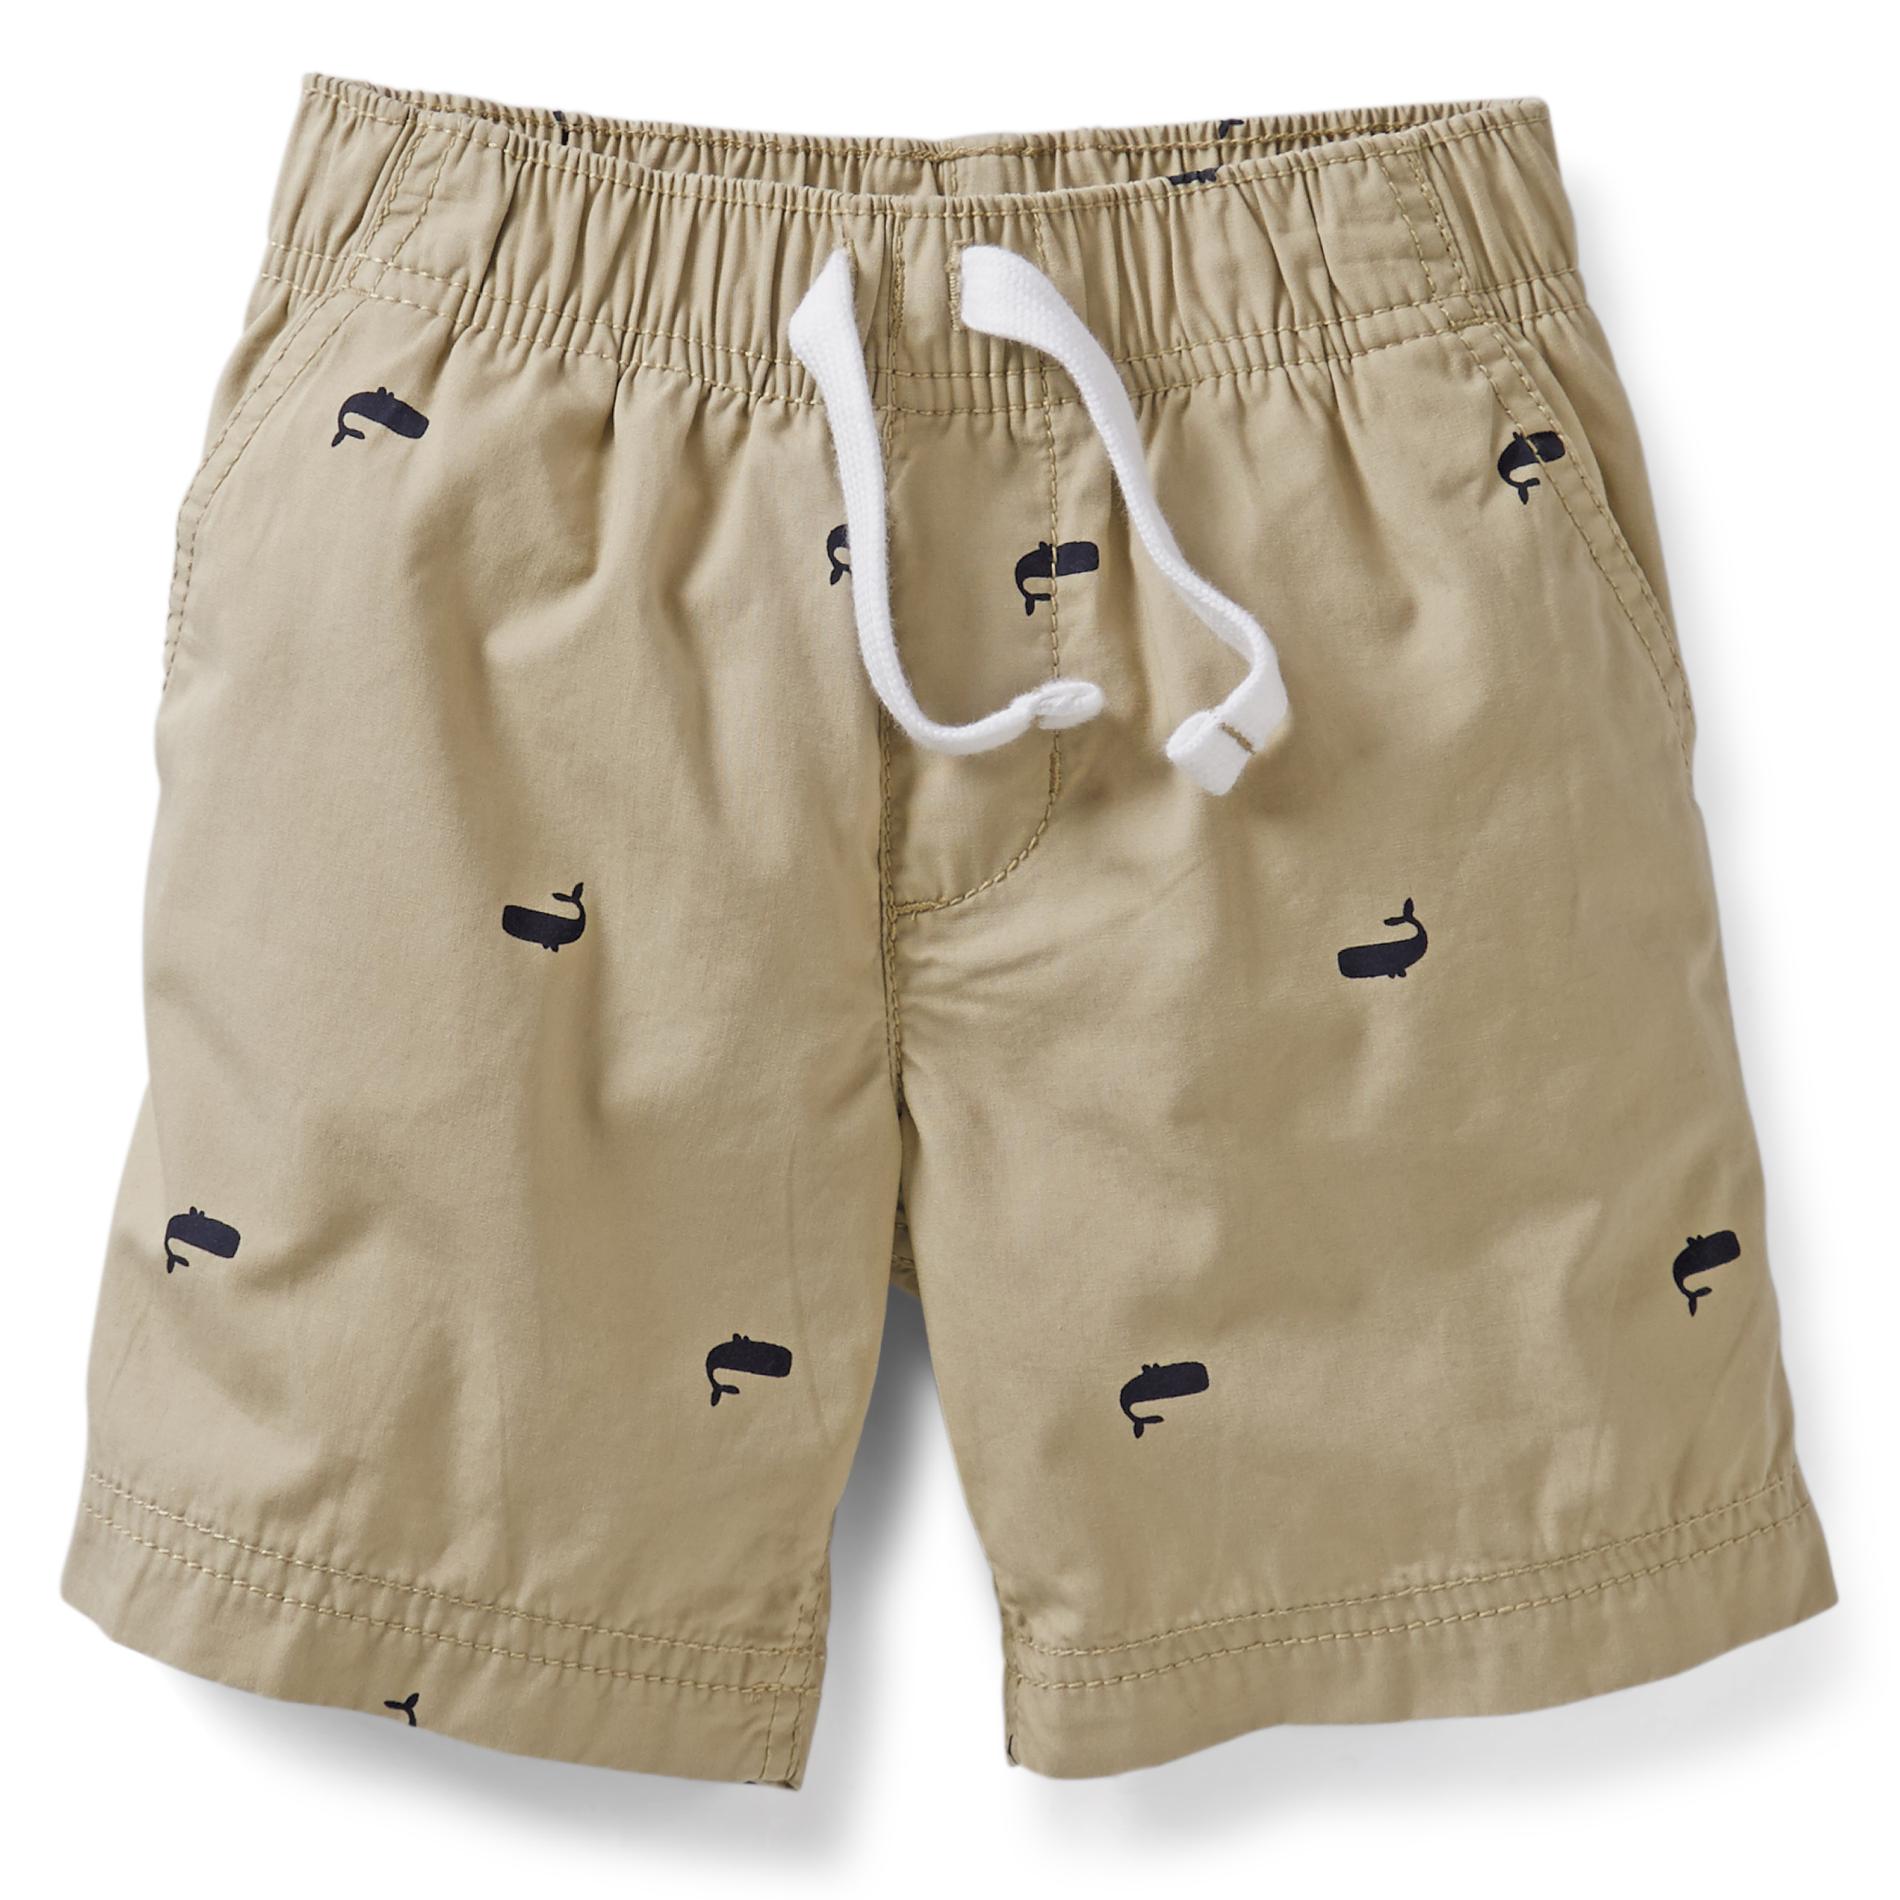 Carter's Toddler Boy's Shorts - Whales